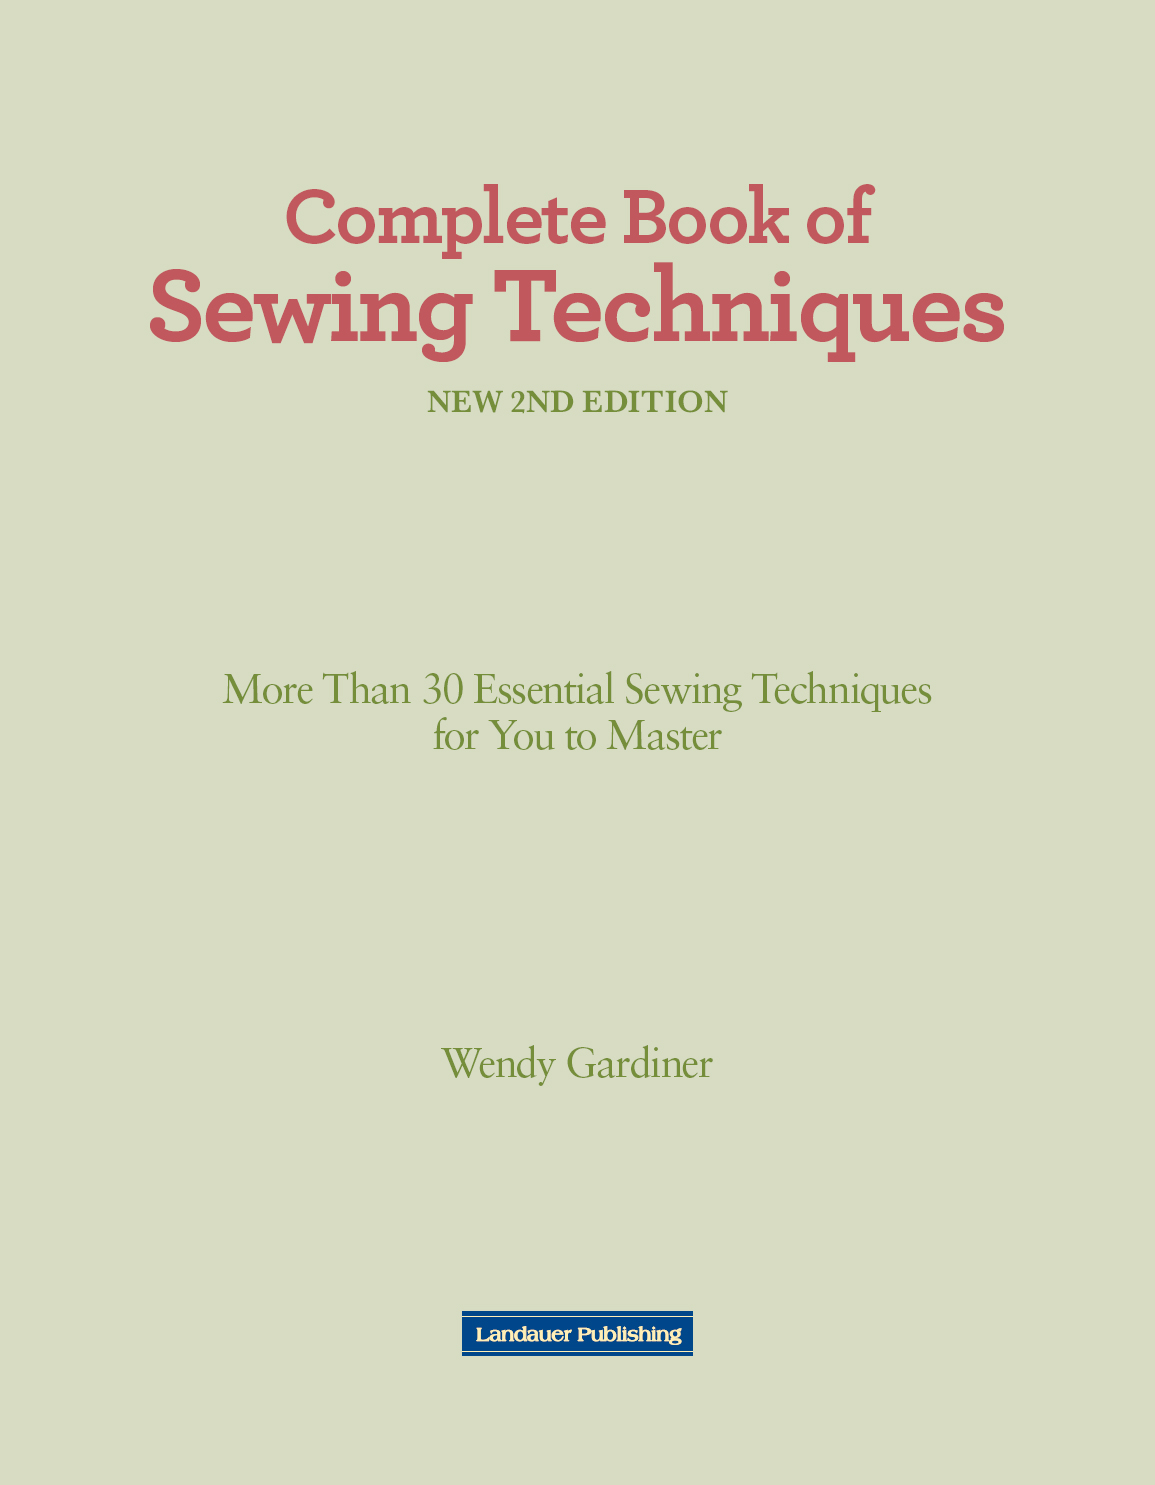 COMPLETE BOOK OF SEWING TECHNIQUES NEW 2ND EDITION Landauer Publishing - photo 3